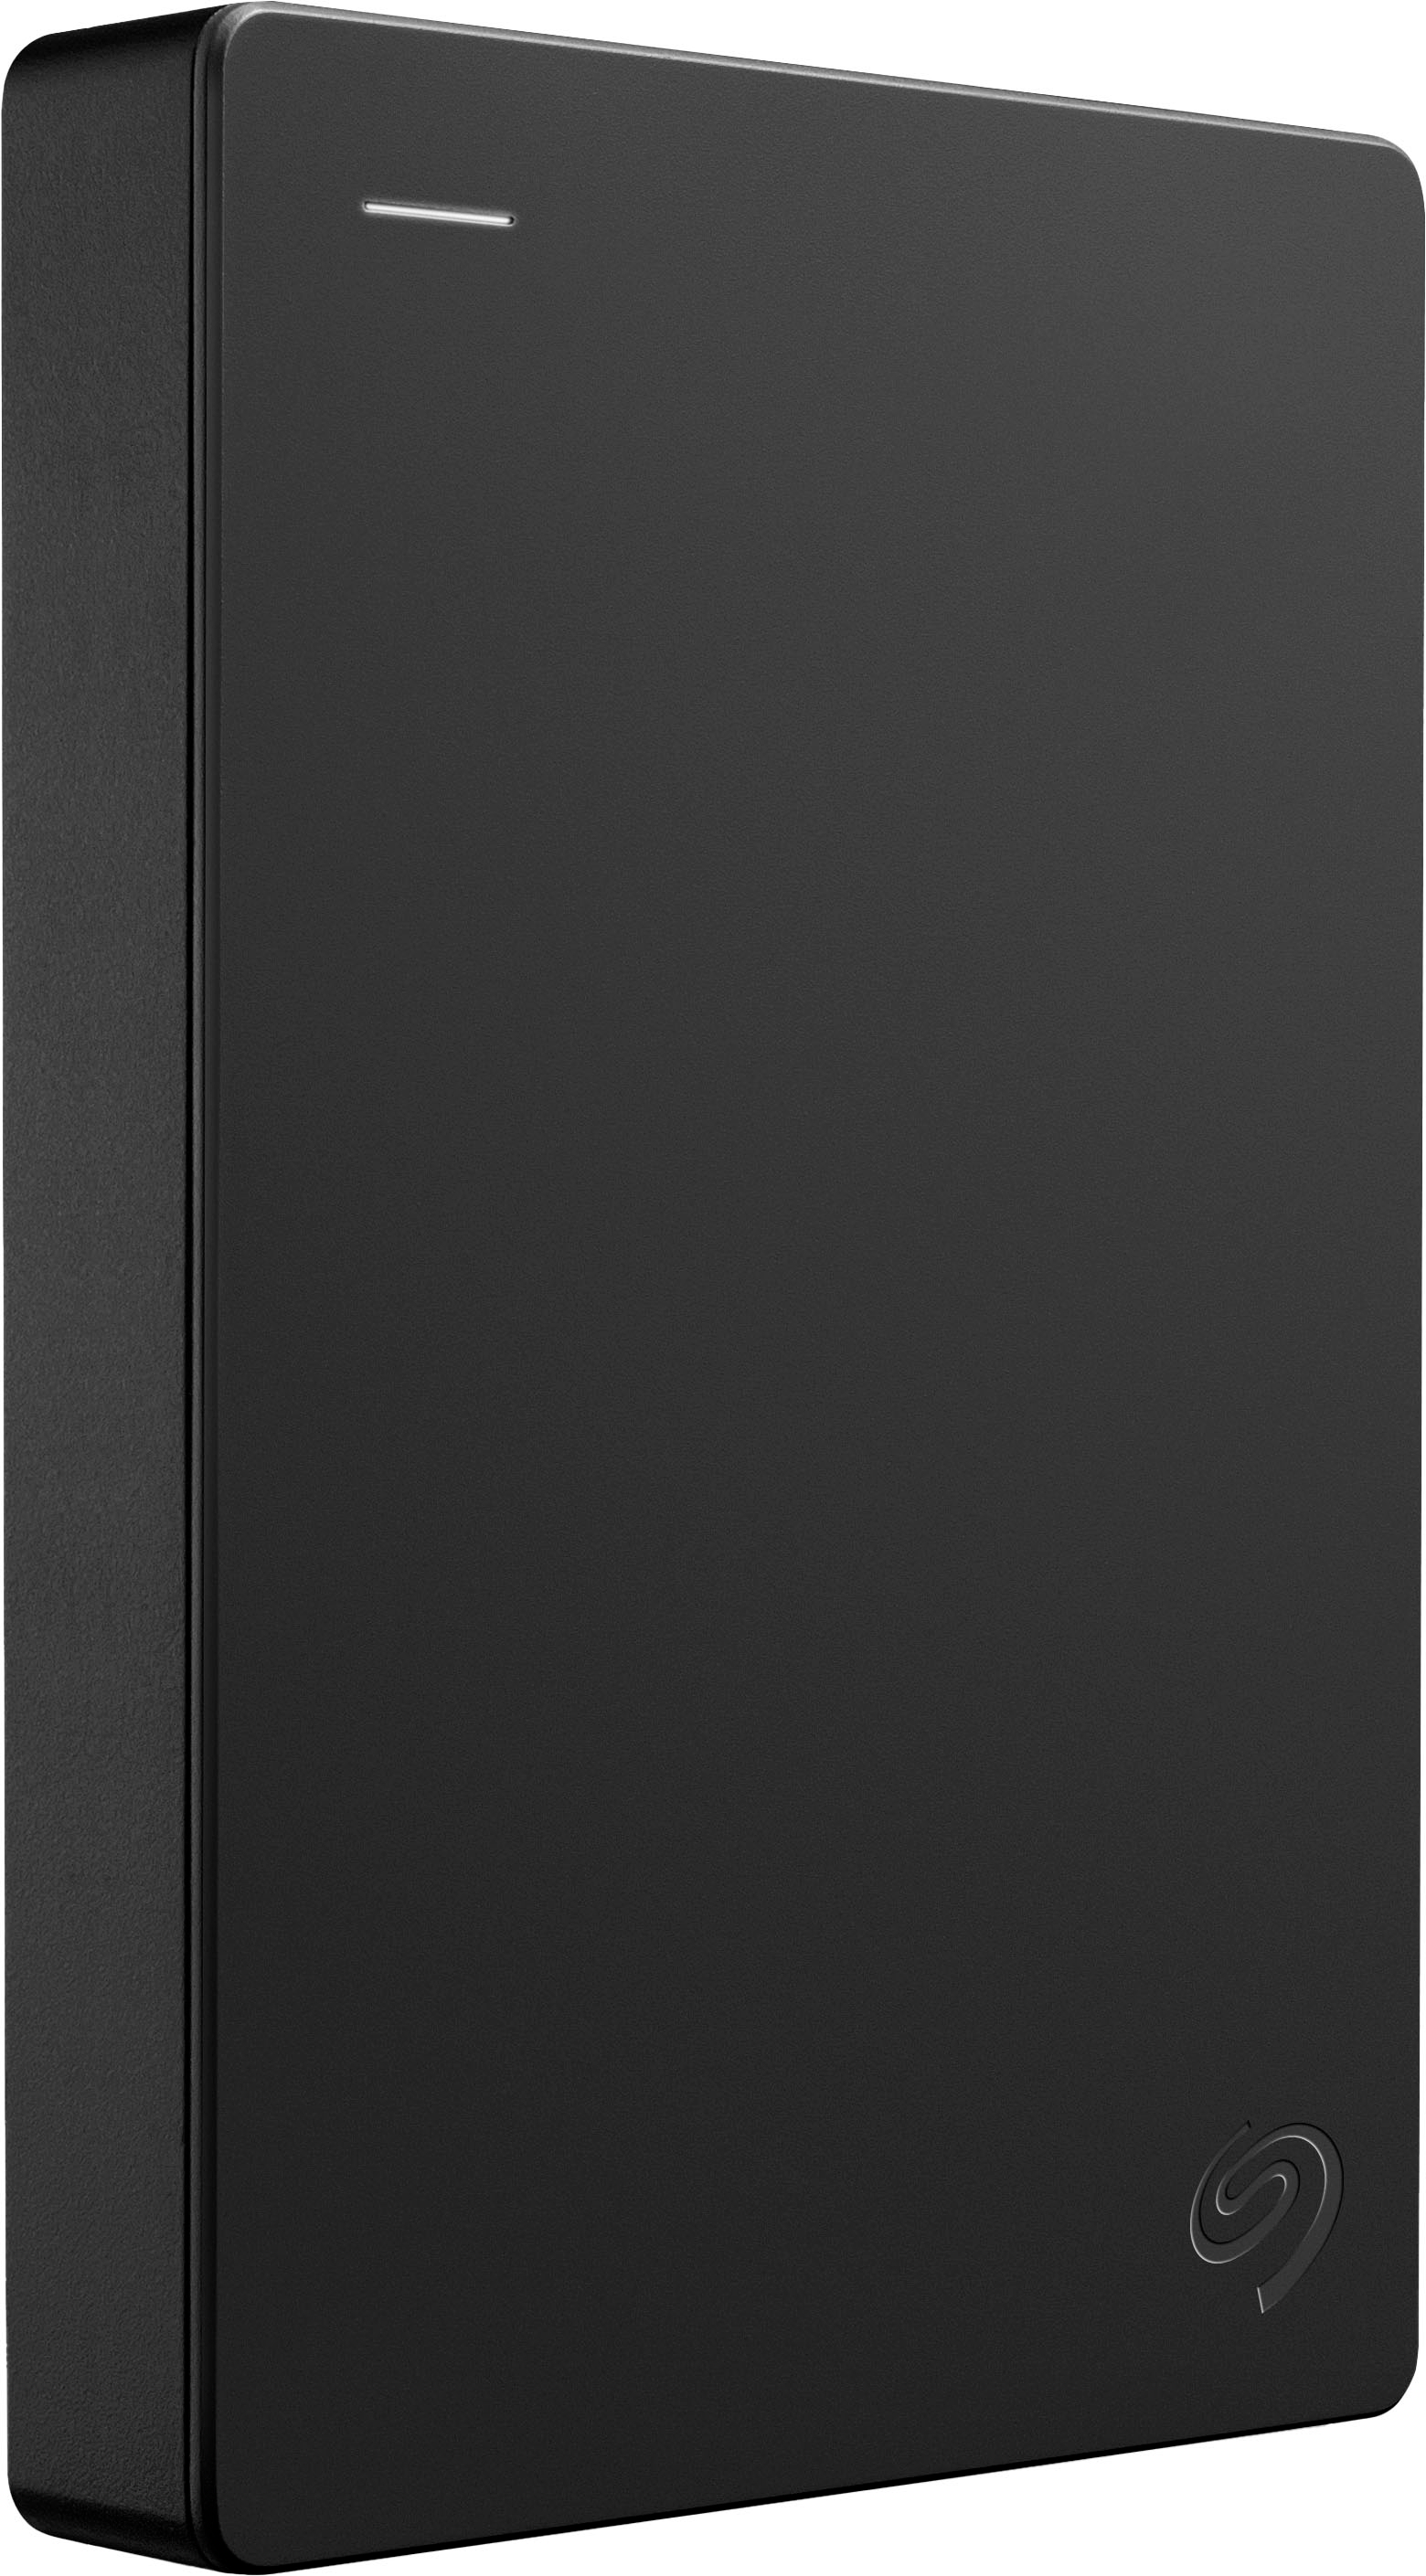 Seagate 5TB External USB Recovery Hard with - Portable Buy Services Black STGX5000400 Rescue 3.0 Data Drive Best